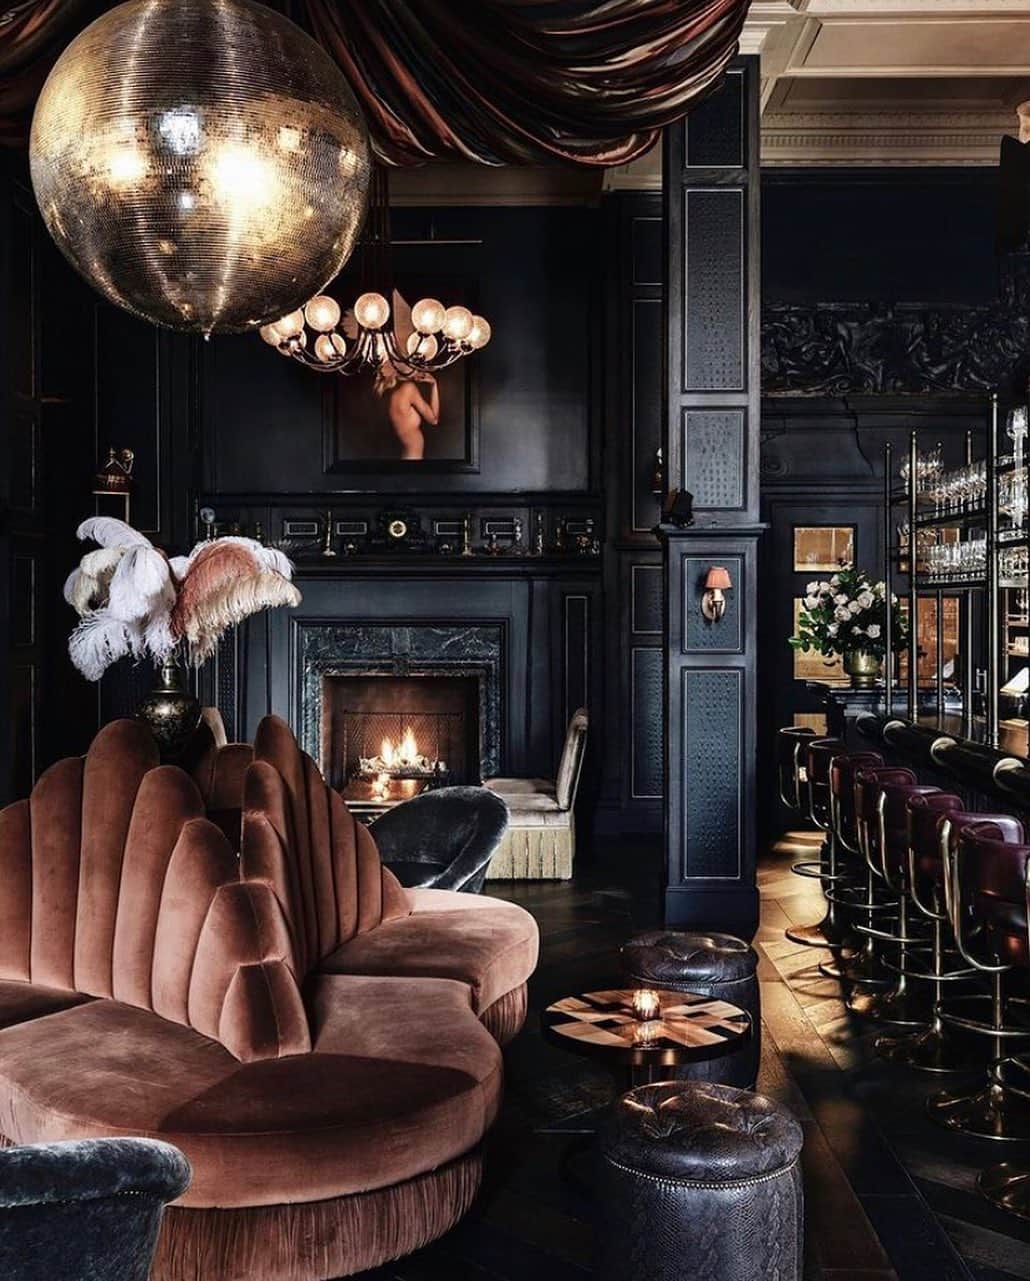 FRENCH GIRLのインスタグラム：「Swooning over @fitzsbar ✨ Its incredible design celebrates the old world glitz and glamour of the roaring 20’s with an ultra-chic, moody-modern update.   Nous adorons 🥂」